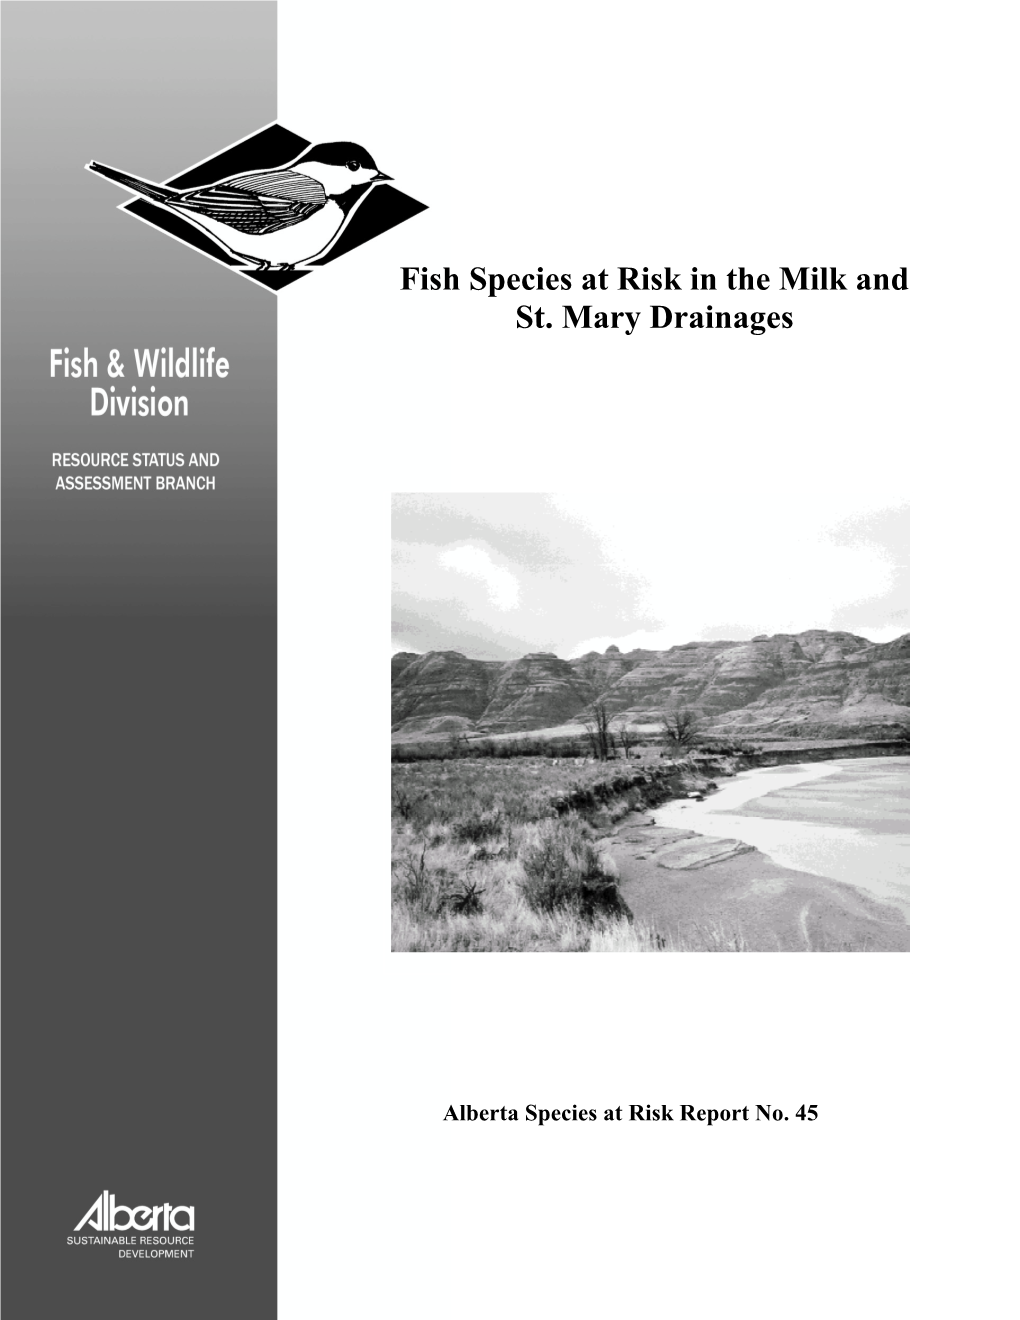 Fish Species at Risk in the Milk and St. Mary Drainages